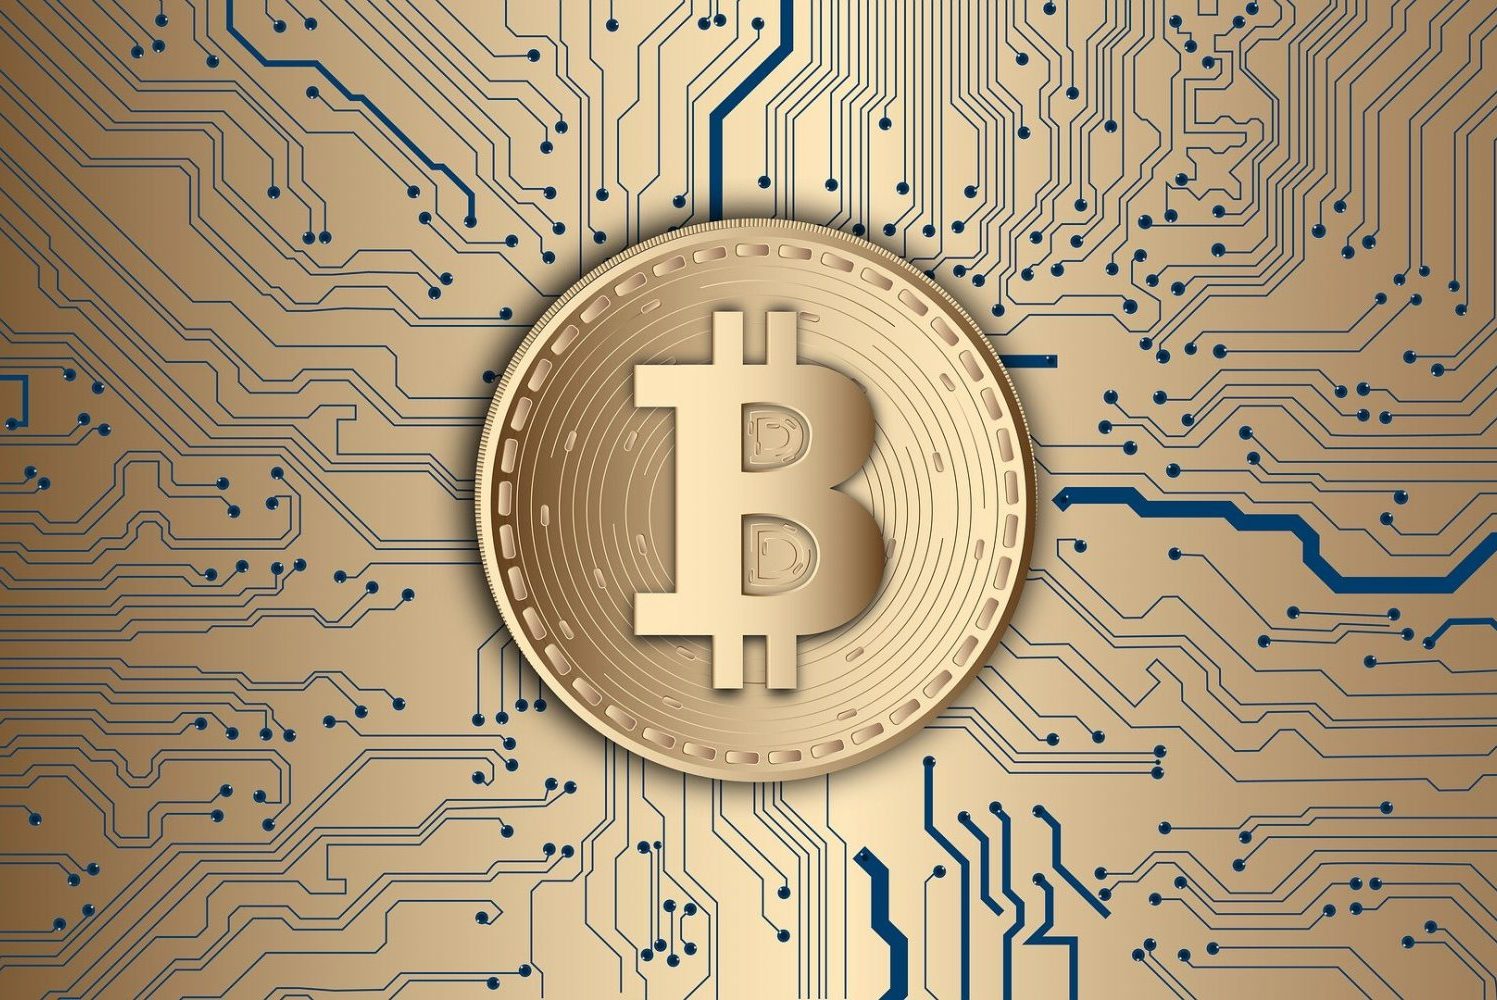 in an article about crypto, the Bitcoin logo in gold